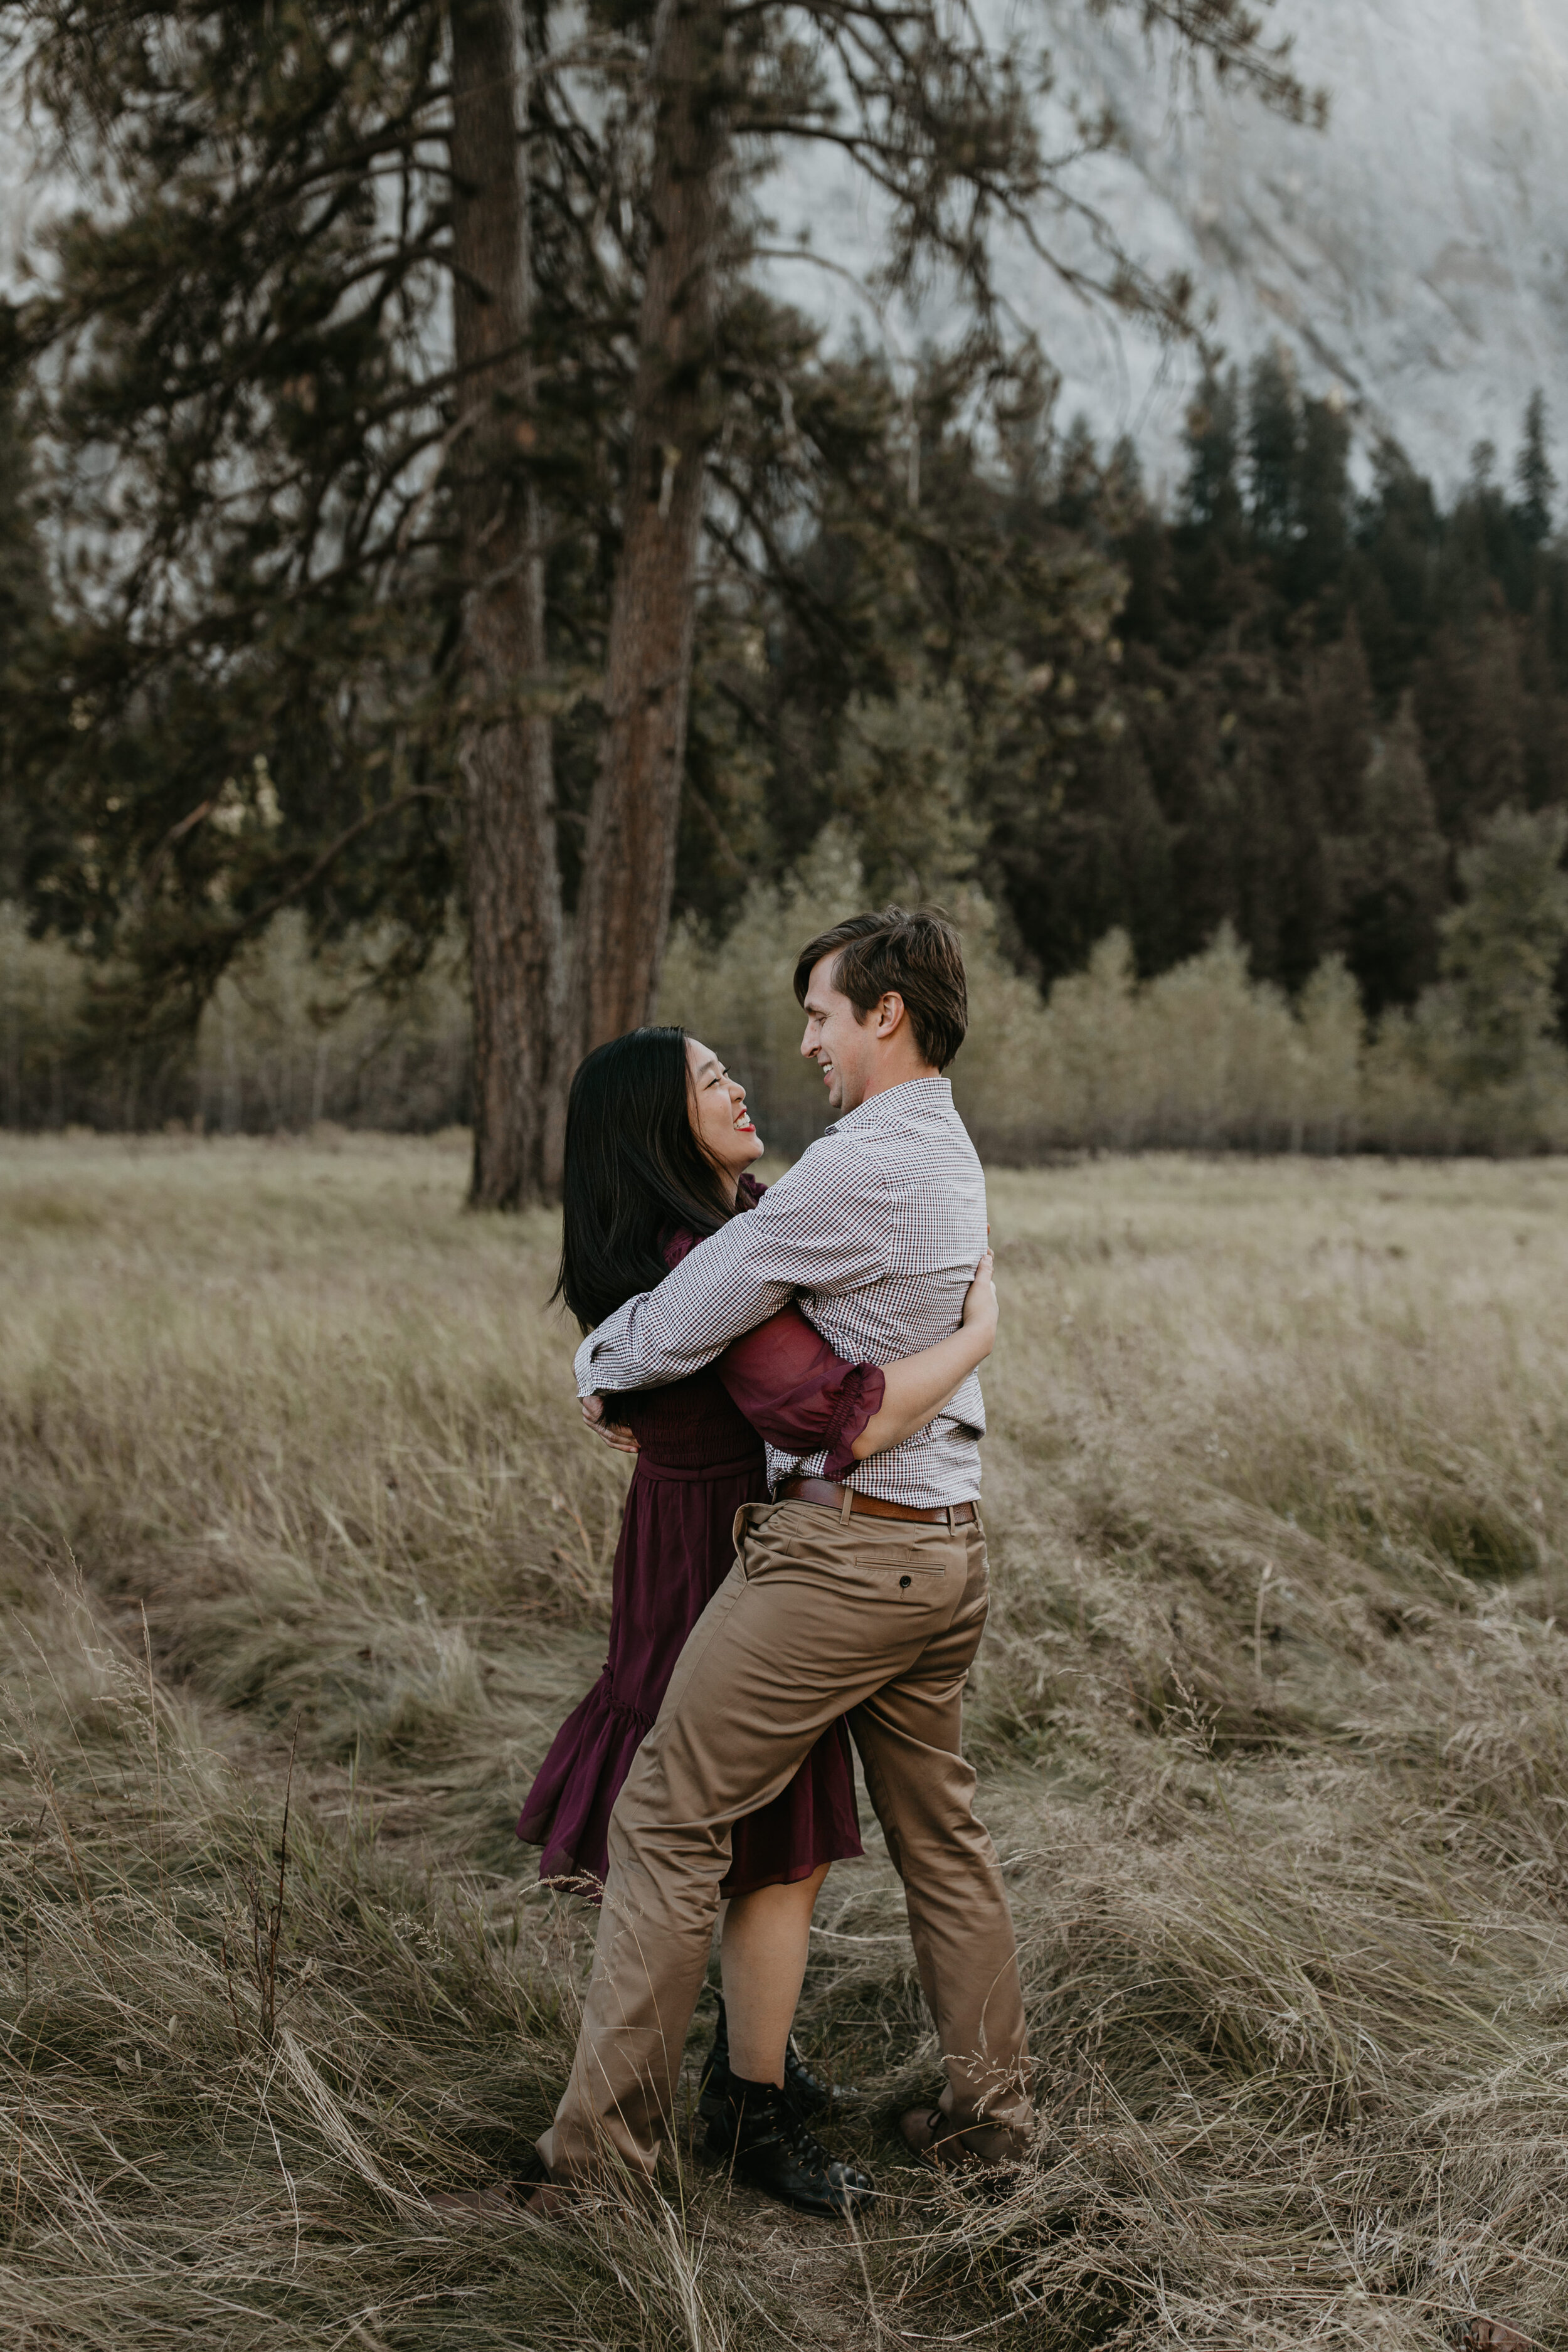 yosemite-national-park-couples-session-at-taft-point-and-yosemite-valley-yosemite-elopement-photographer-nicole-daacke-photography-107.jpg